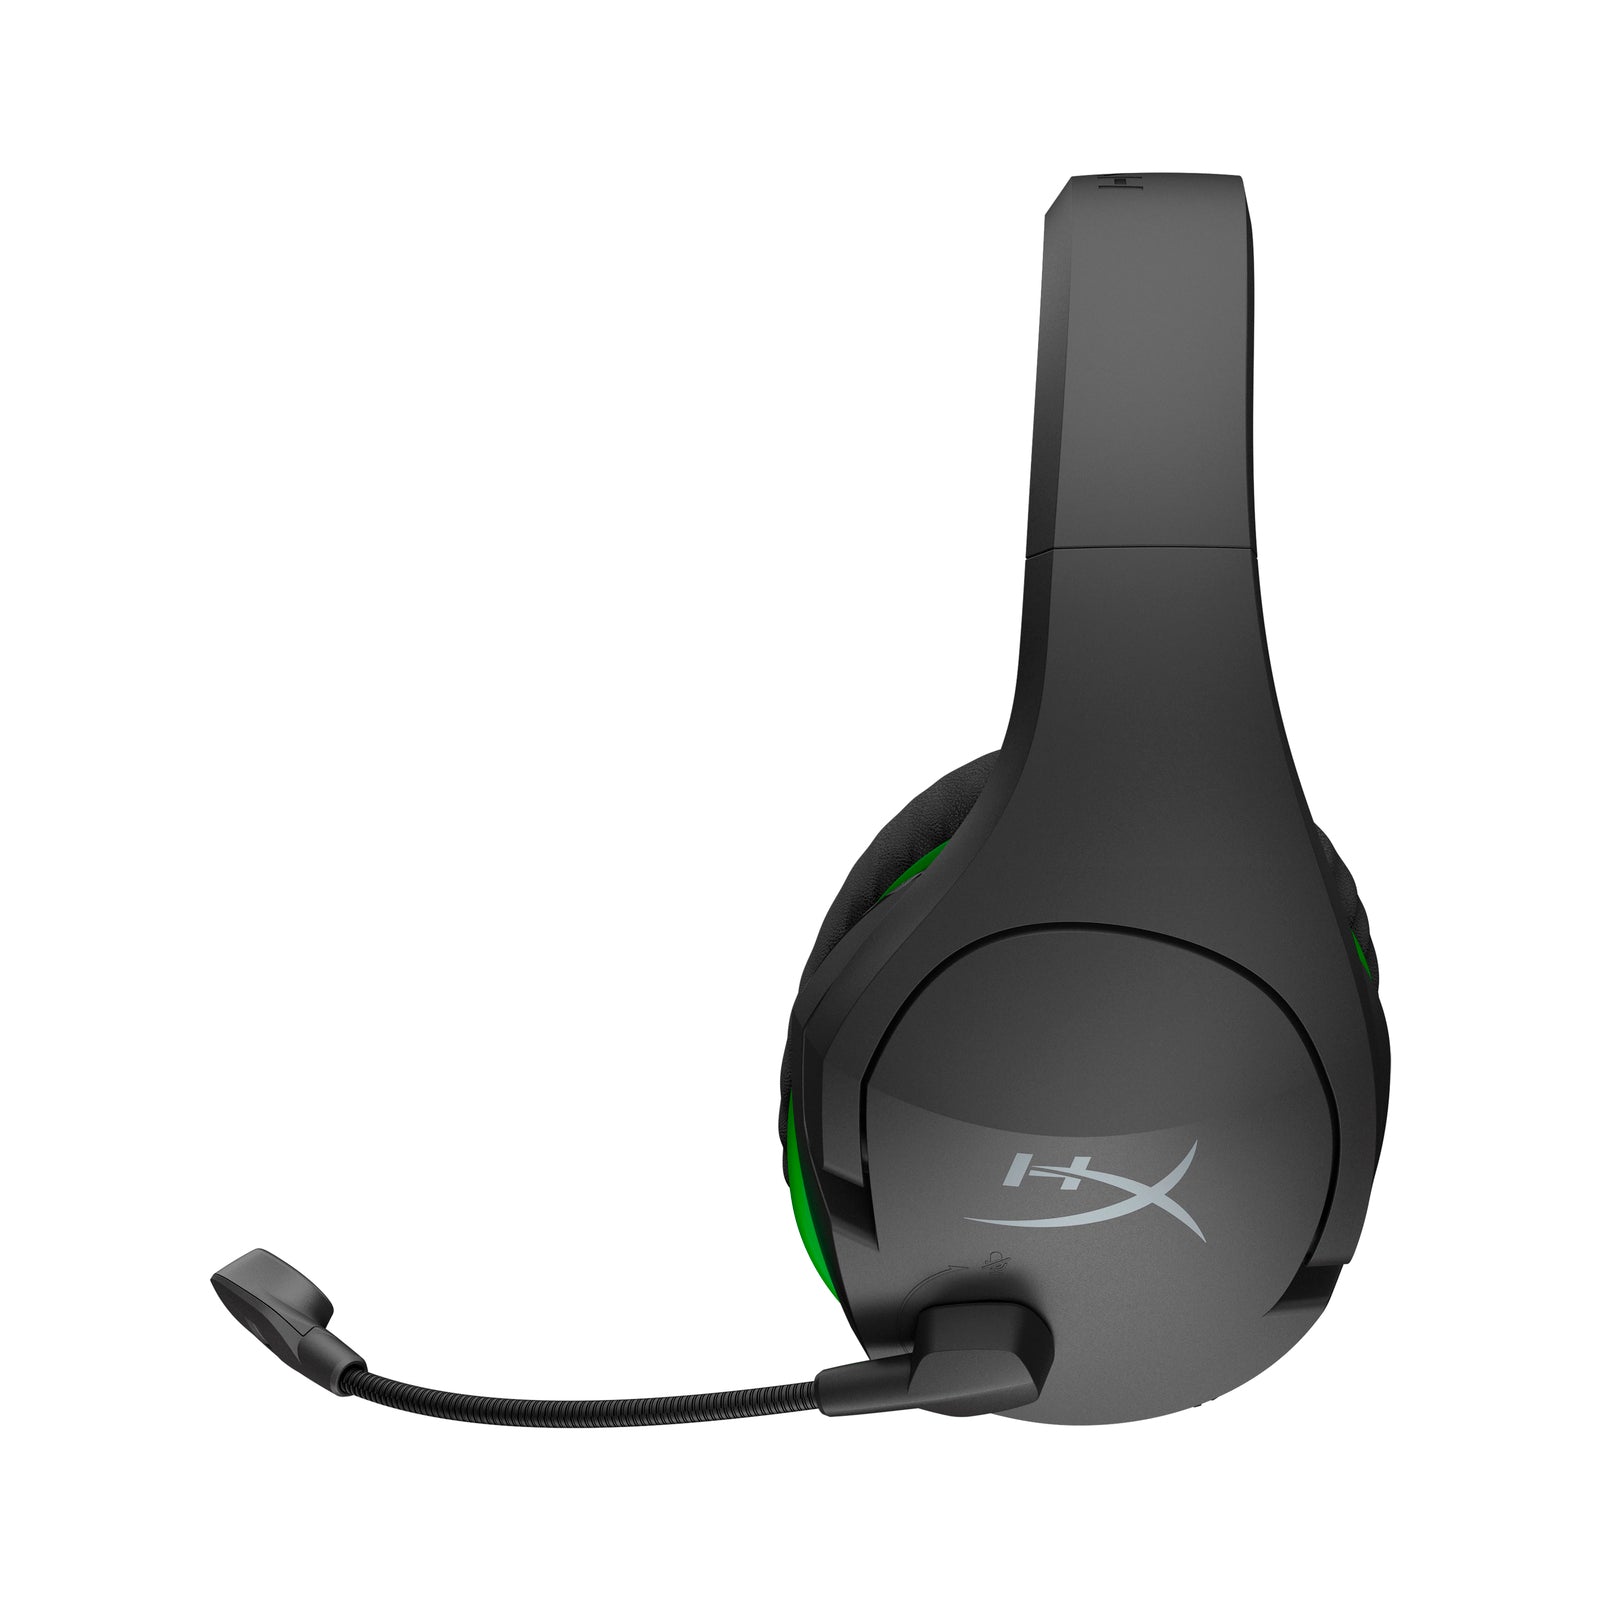 Why can't I activate 7.1 on my HyperX cloud 2 wireless? : r/HyperX